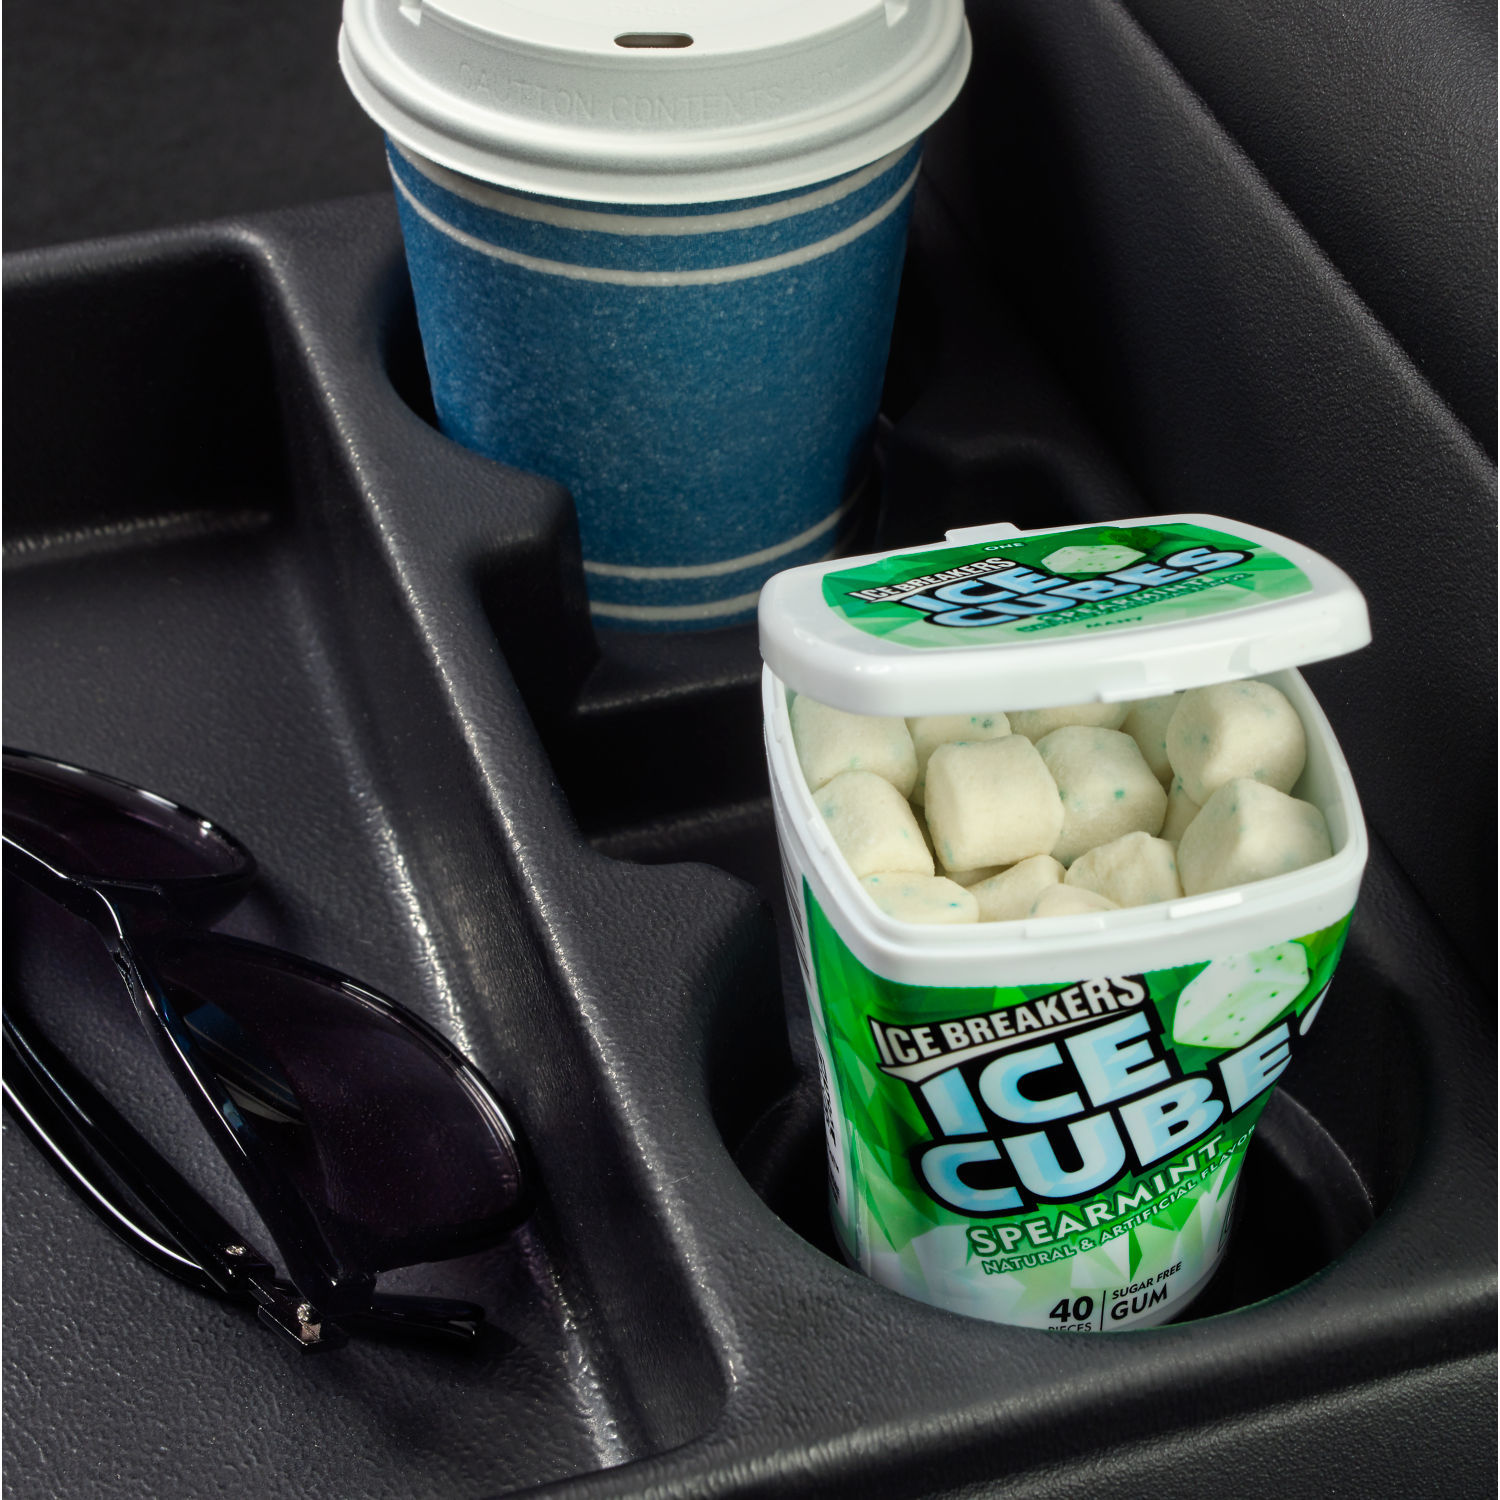 Ice Breakers Ice Cubes Spearmint Sugar Free Chewing Gum, Bottle 3.24 oz, 40 Pieces - image 5 of 8